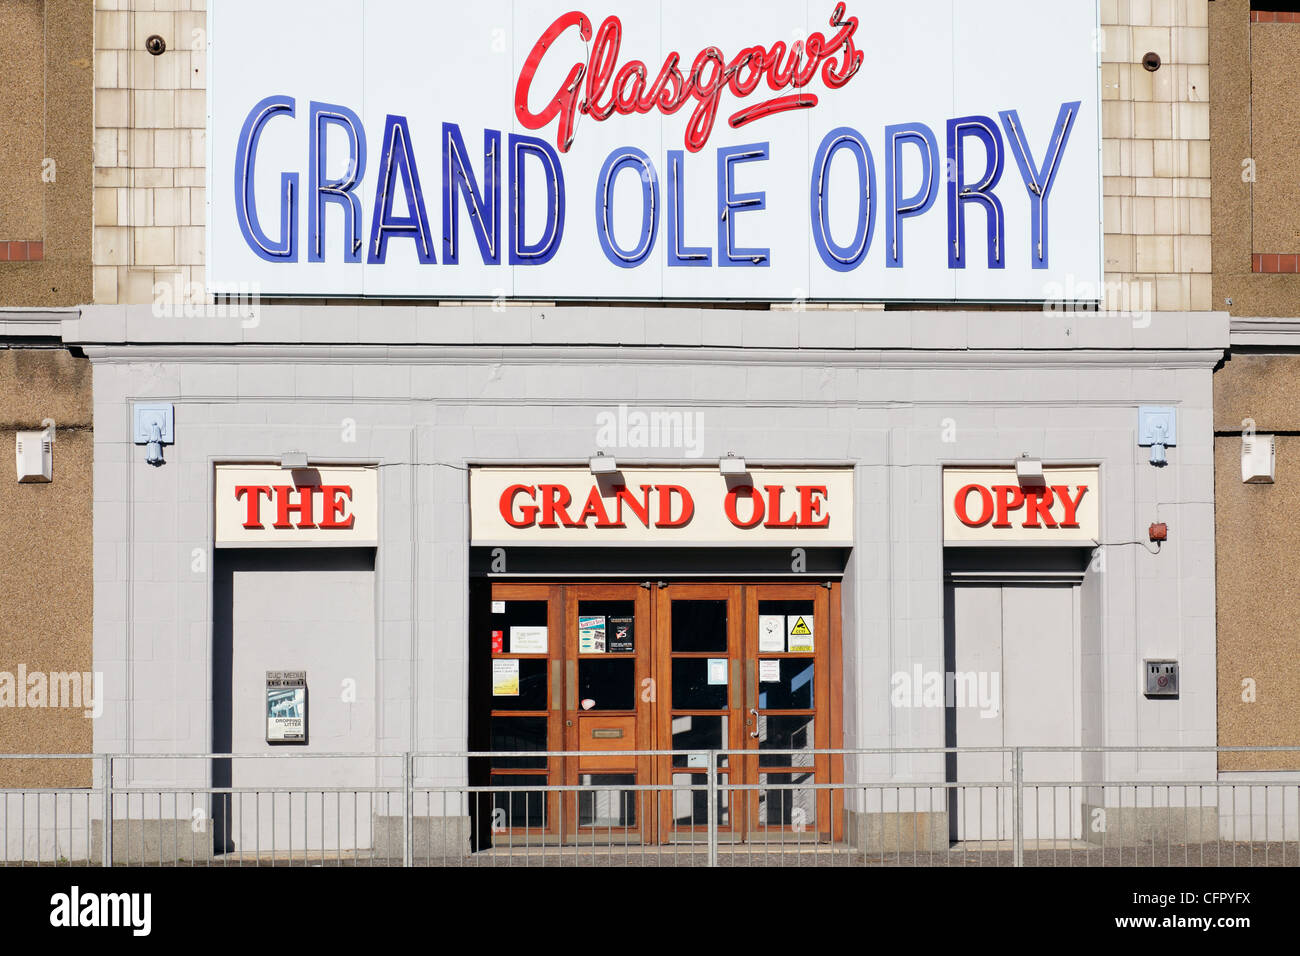 Entrance to the Grand Ole Opry a traditional Country and Western live music venue, Govan Road, Glasgow, Scotland, UK Stock Photo